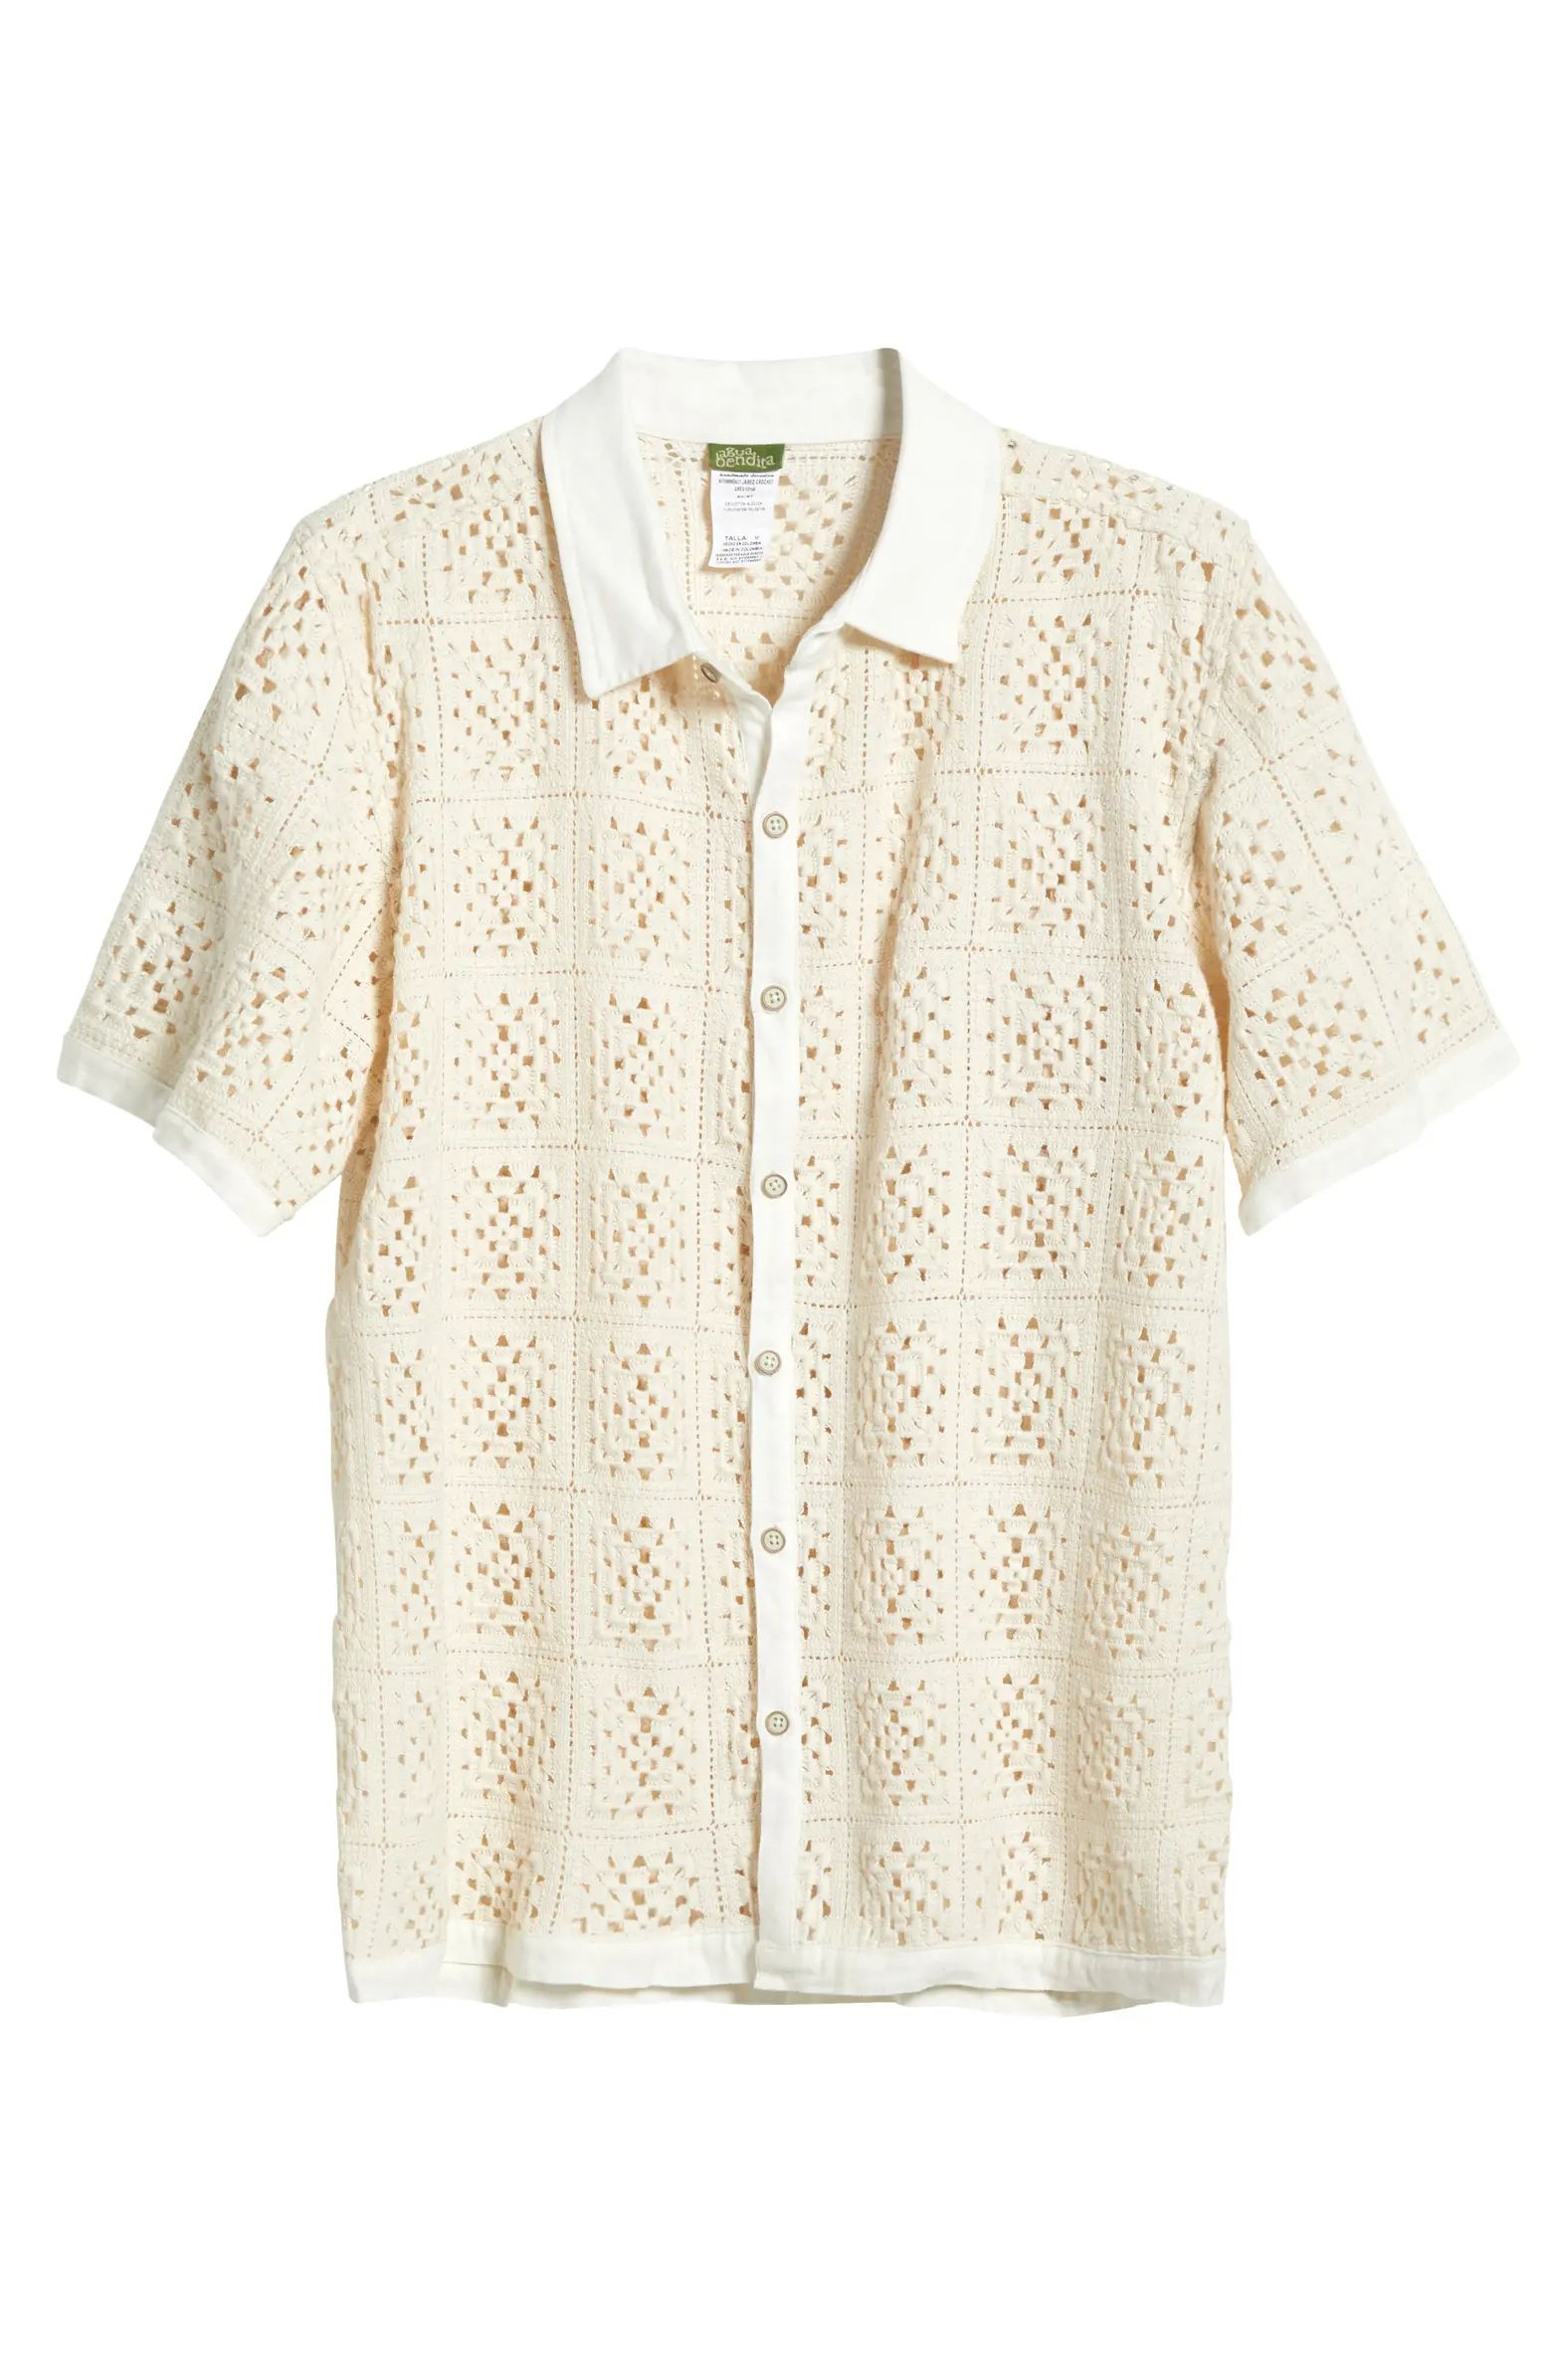 Jared Gres Open Stitch Cover-Up Shirt | Nordstrom